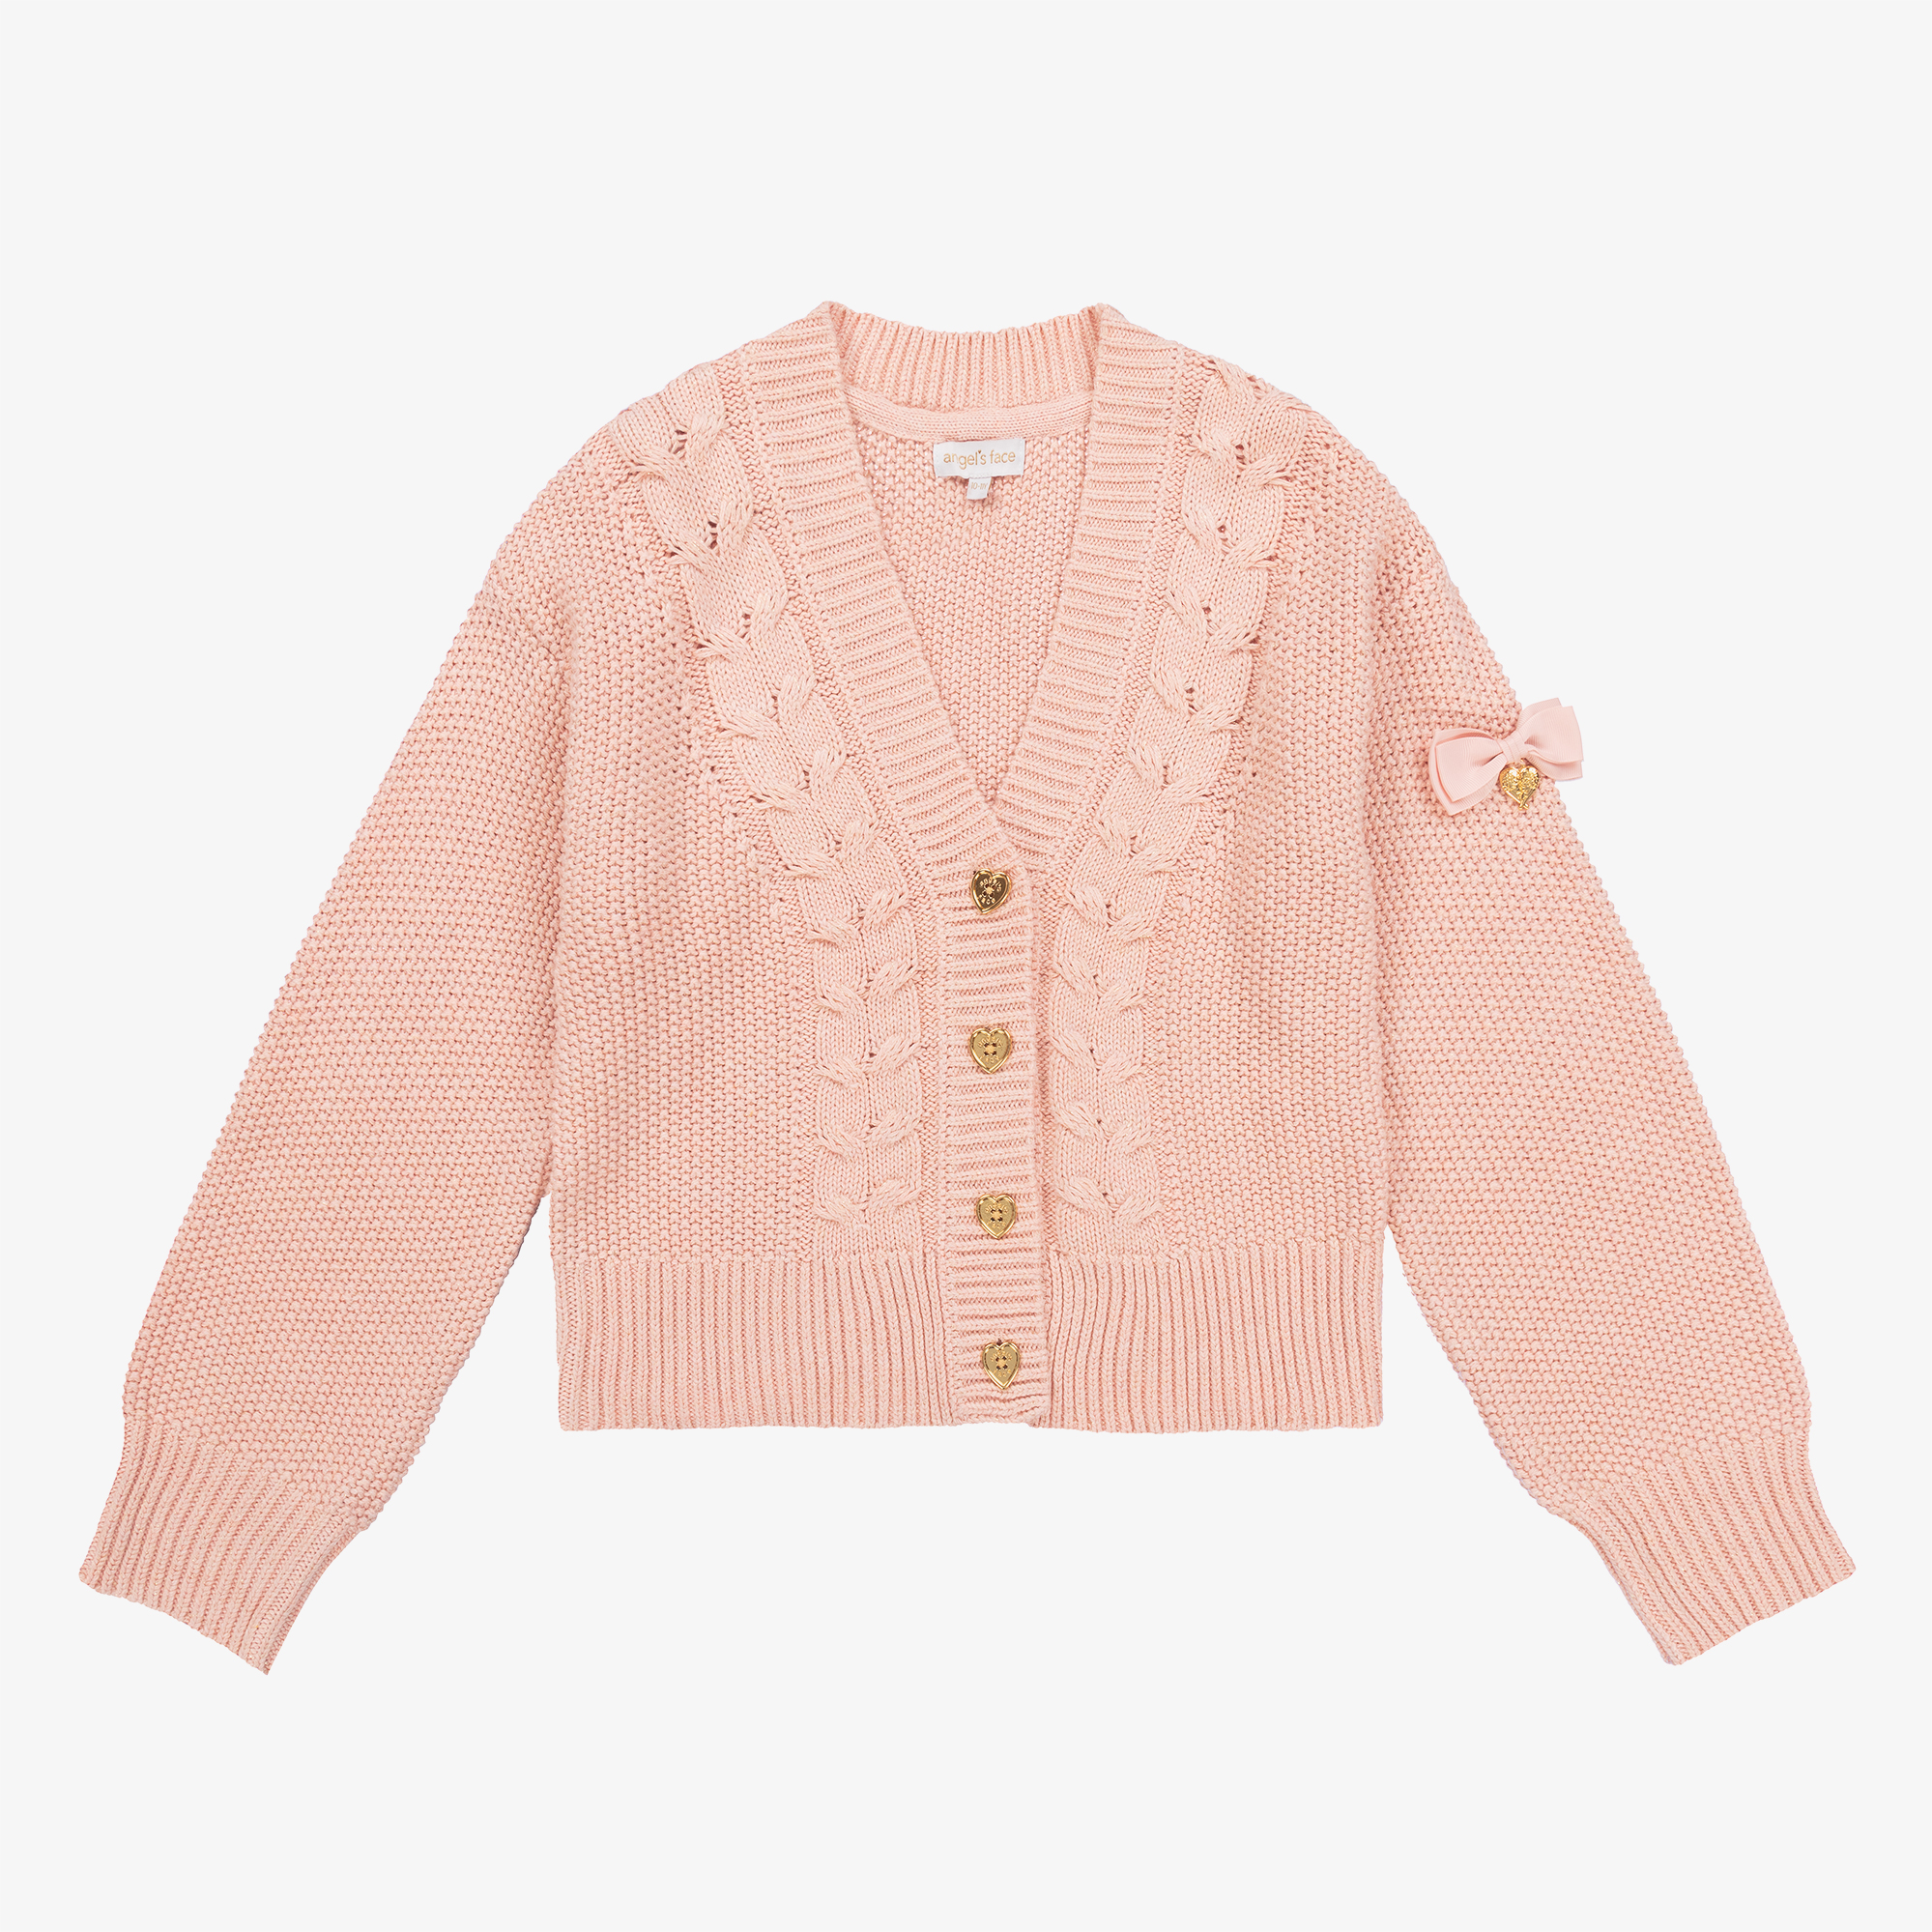 Angel's Face Teen Girls Pink Cable Knit Cardigan